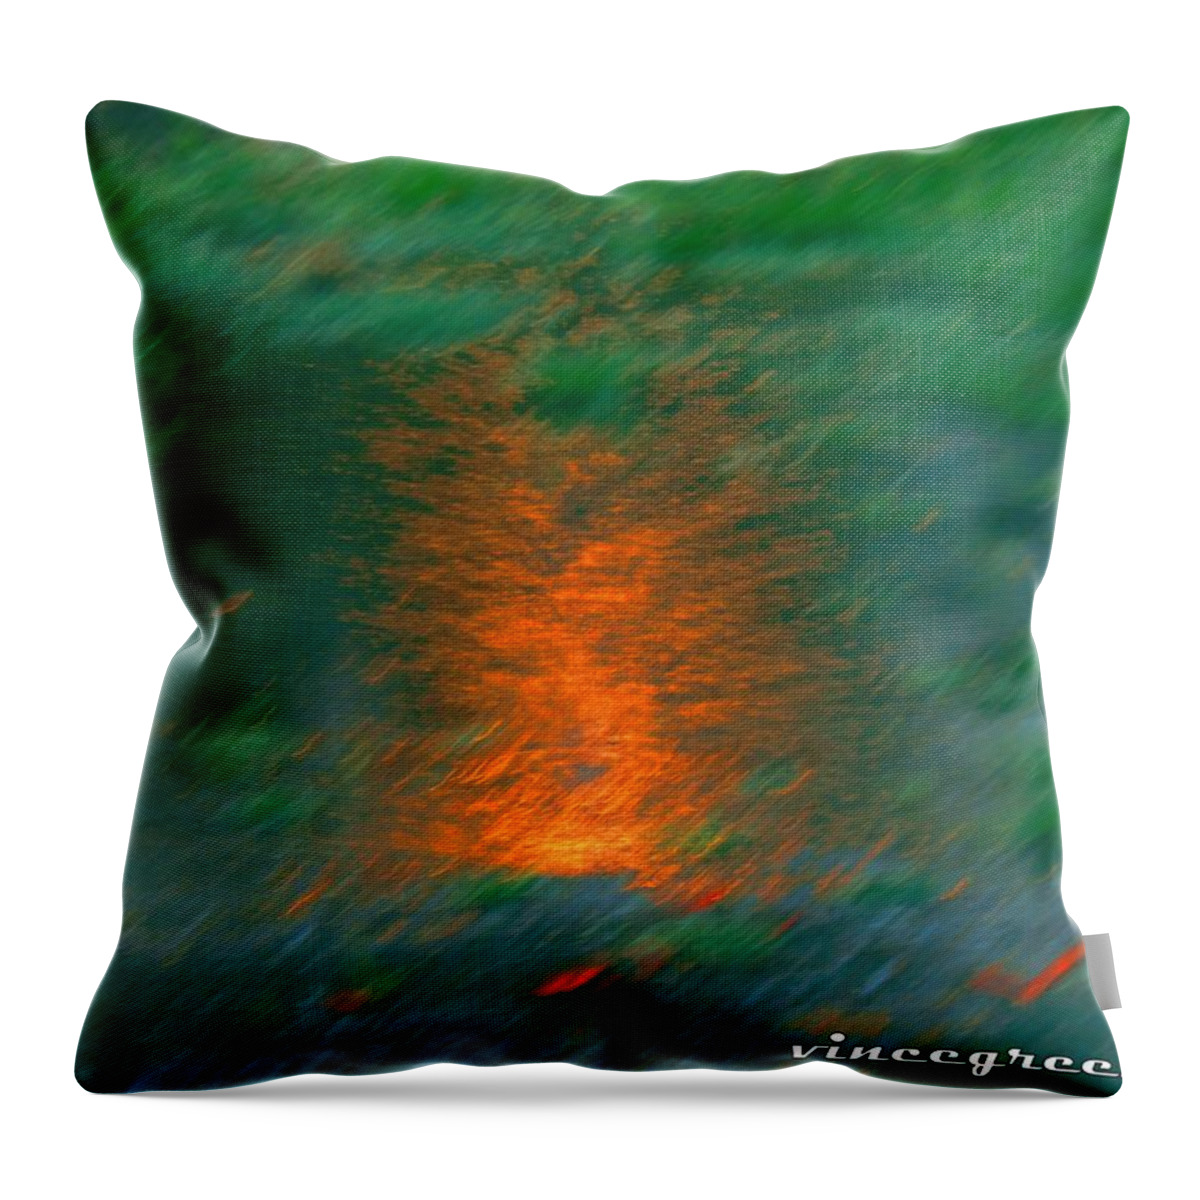 Abstract Throw Pillow featuring the digital art Fire Water by Vincent Green